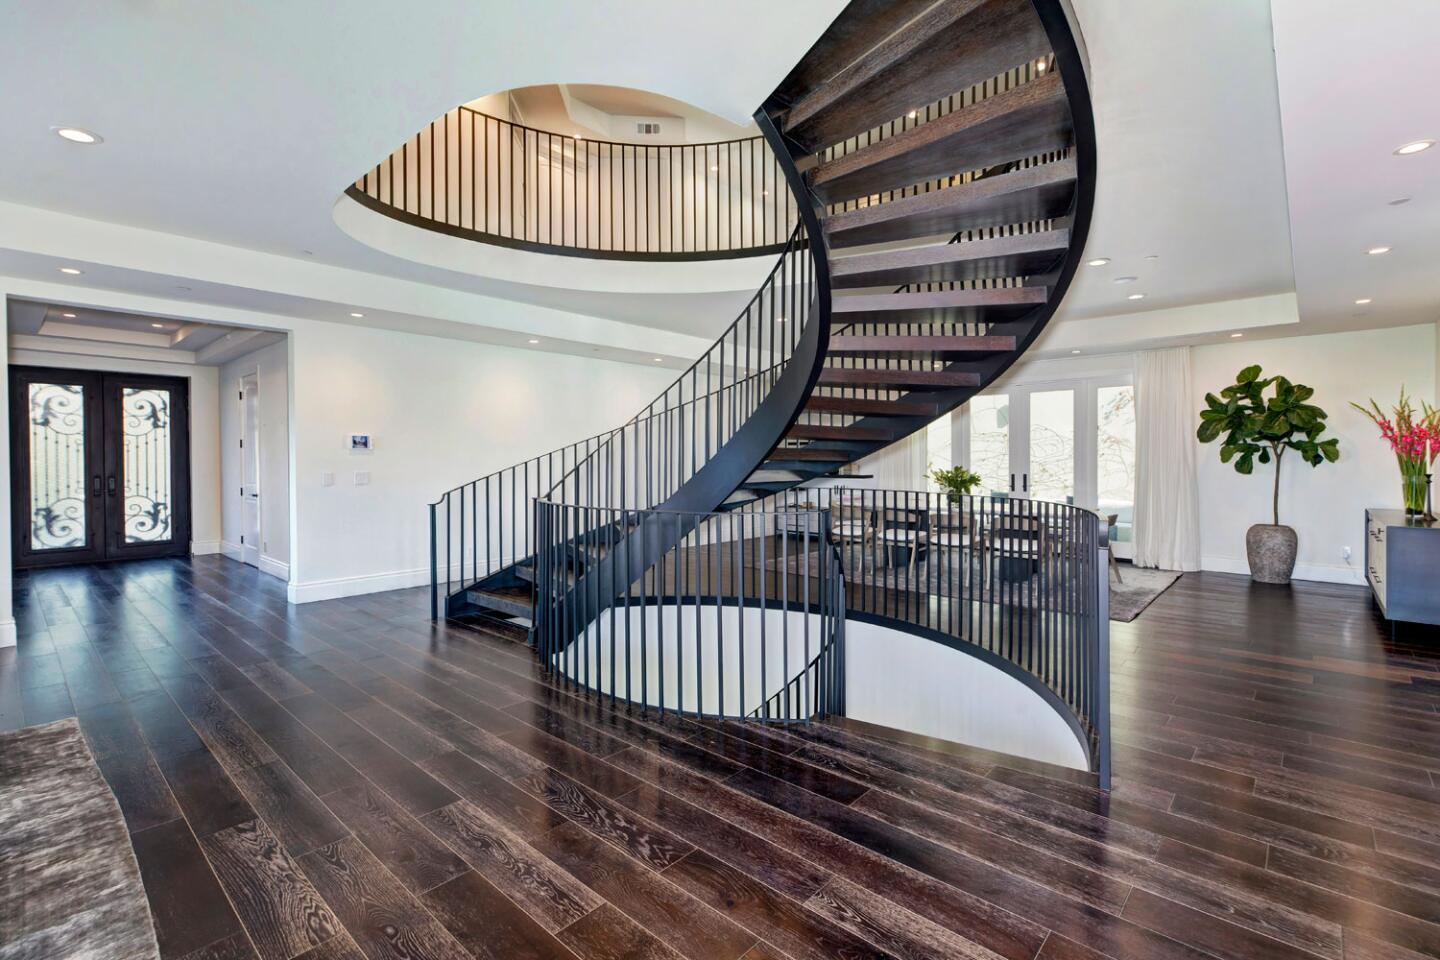 The entry with curved staircase.